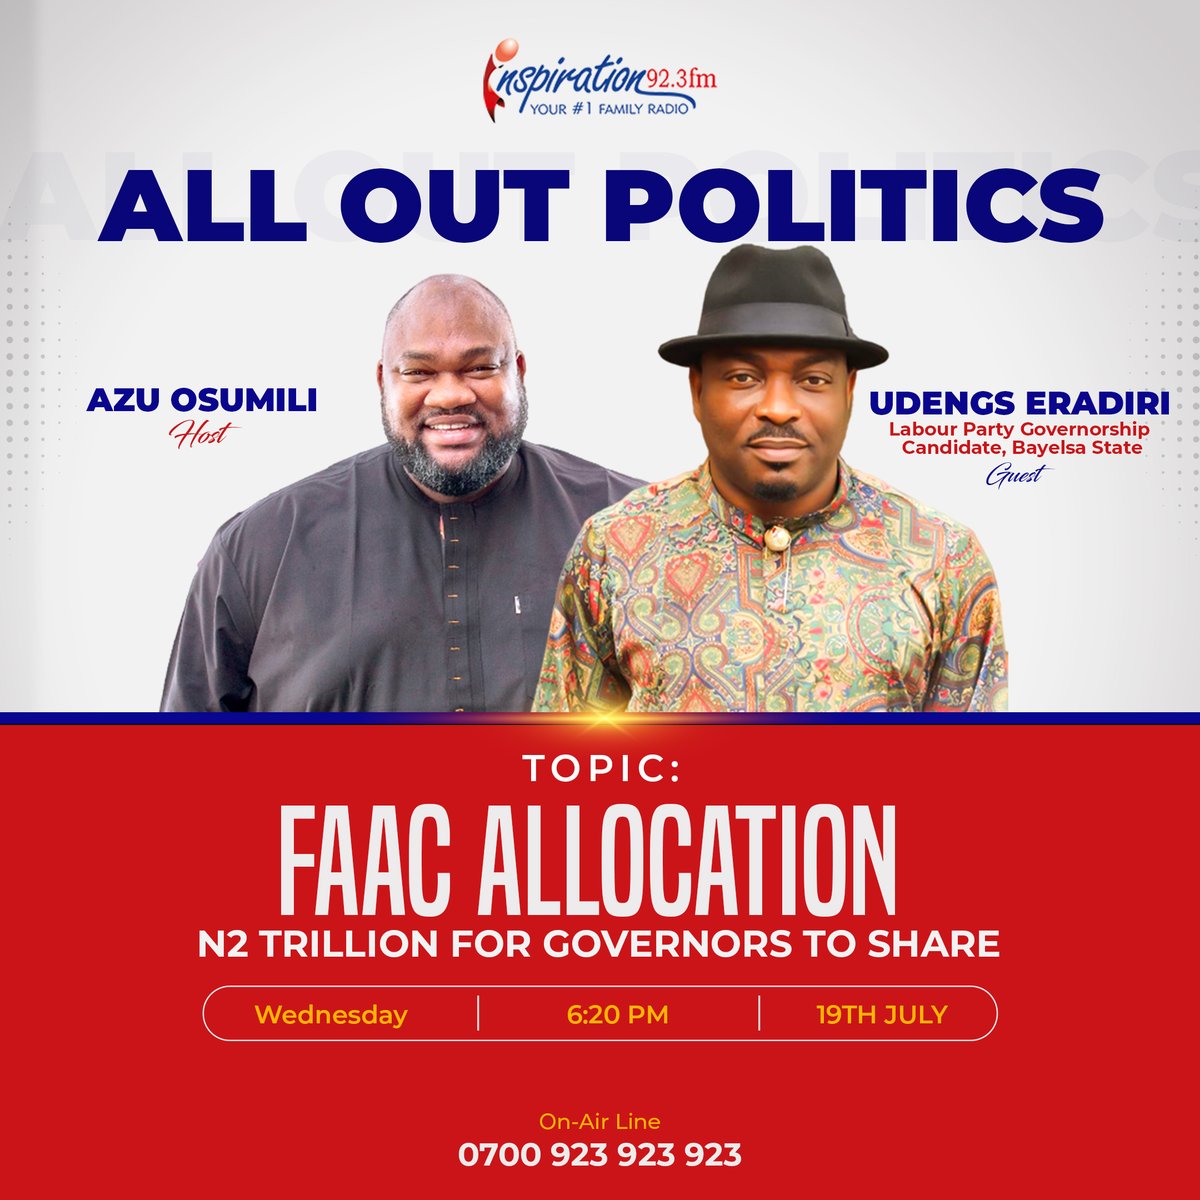 See who's joining us on ALL OUT POLITICS this Evening 🔻

LP Governorship Candidate, UDENGS ERADIRI & we are looking at FAAC ALLOCATION (2Trillion For Governors to share)

Don't forget to join the conversation with @azuosumili on #AllOutPolitics at 6:20PM #yourno1familyradio📻